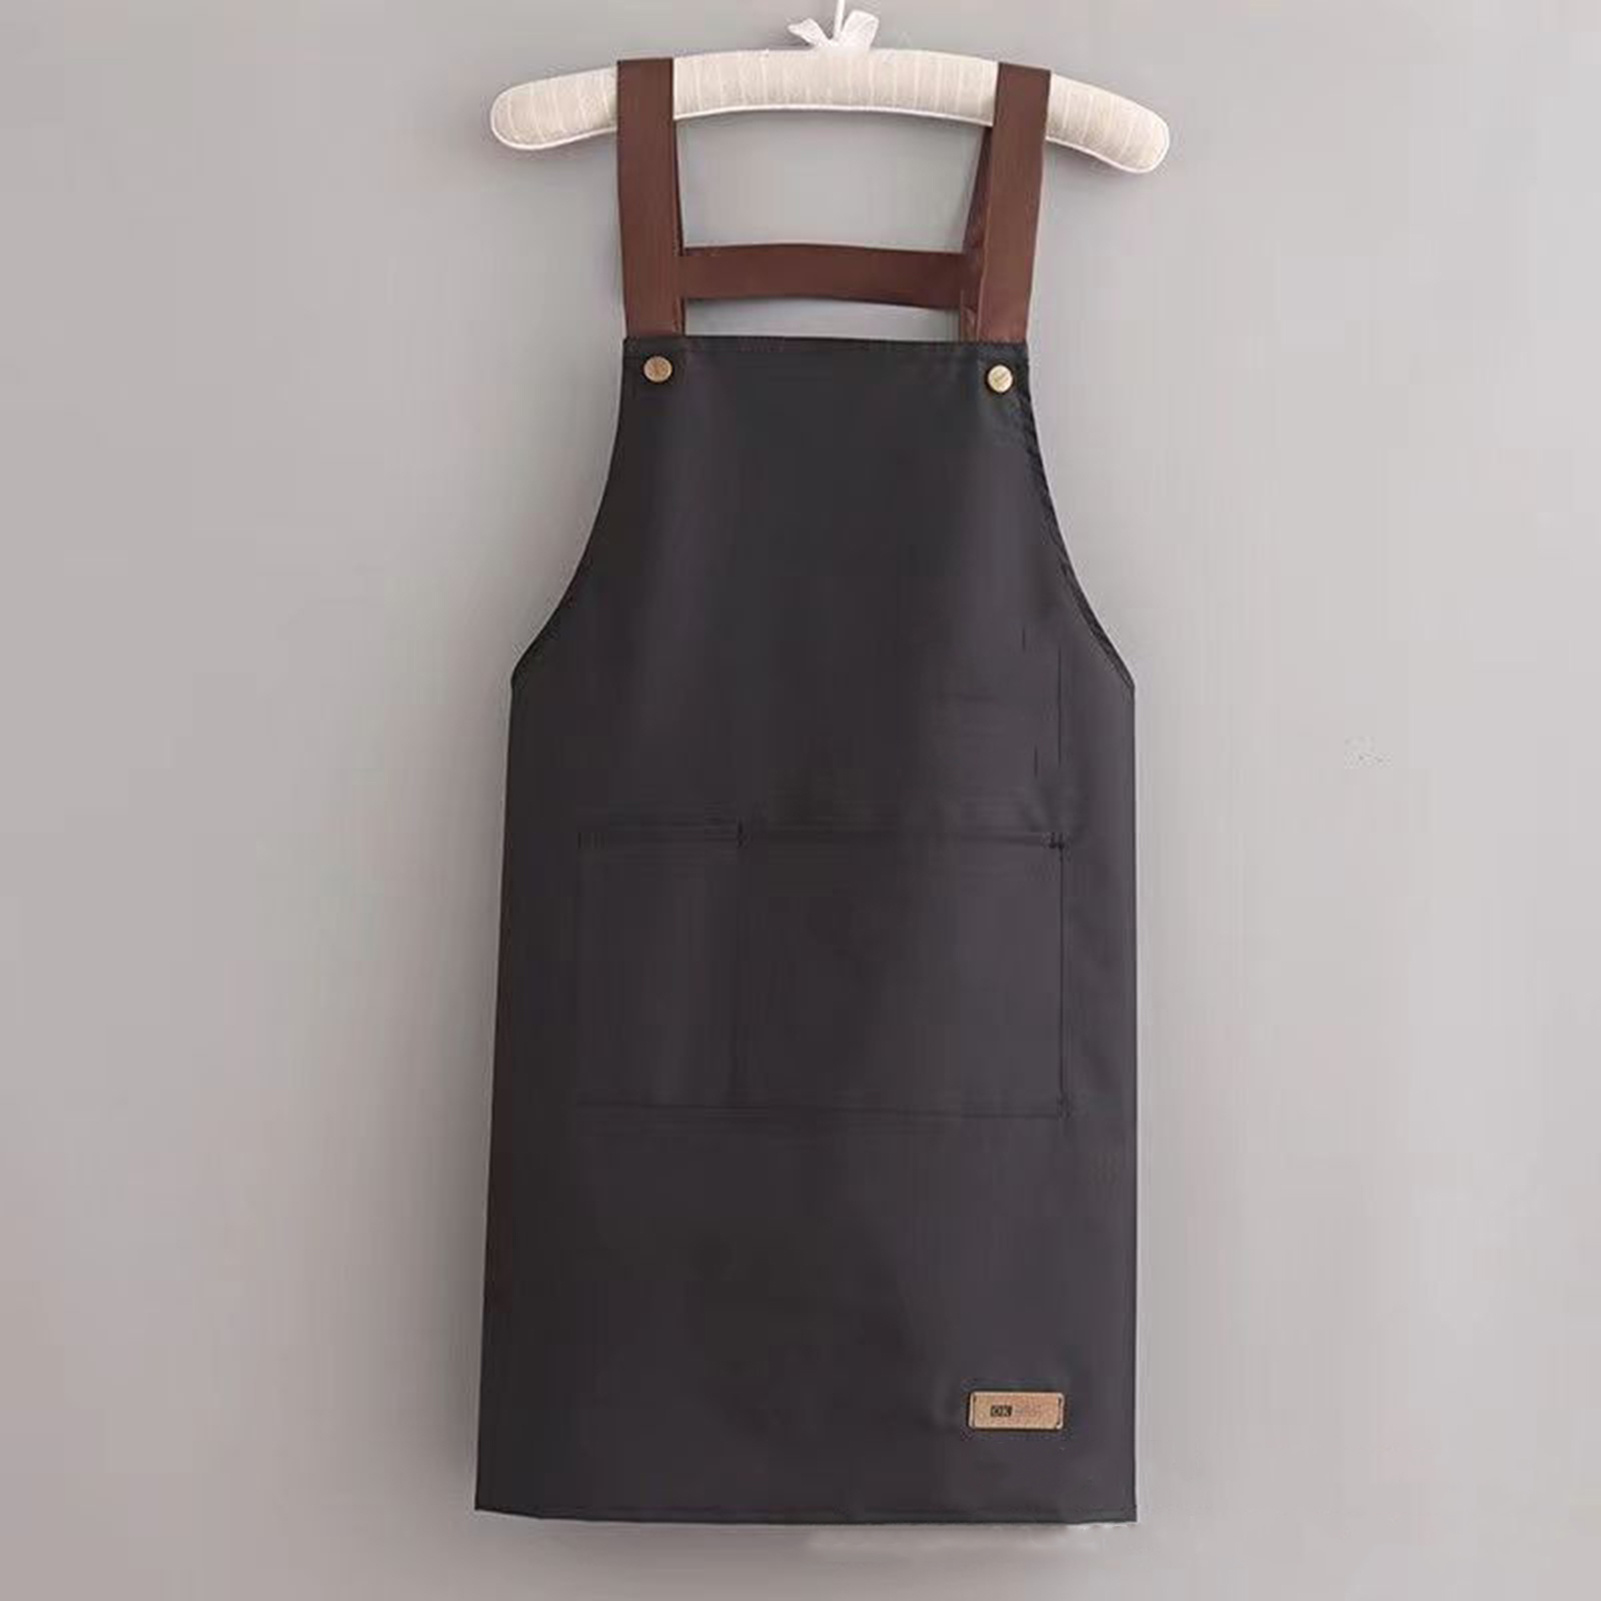 

1pc Apron Work Apron Waterproof Oil-proof Kitchen Apron With Large Pockets Workwear For Restaurant Cafes Beauty Nails Studios Uniform Work Clothes For Home Garden 33.86